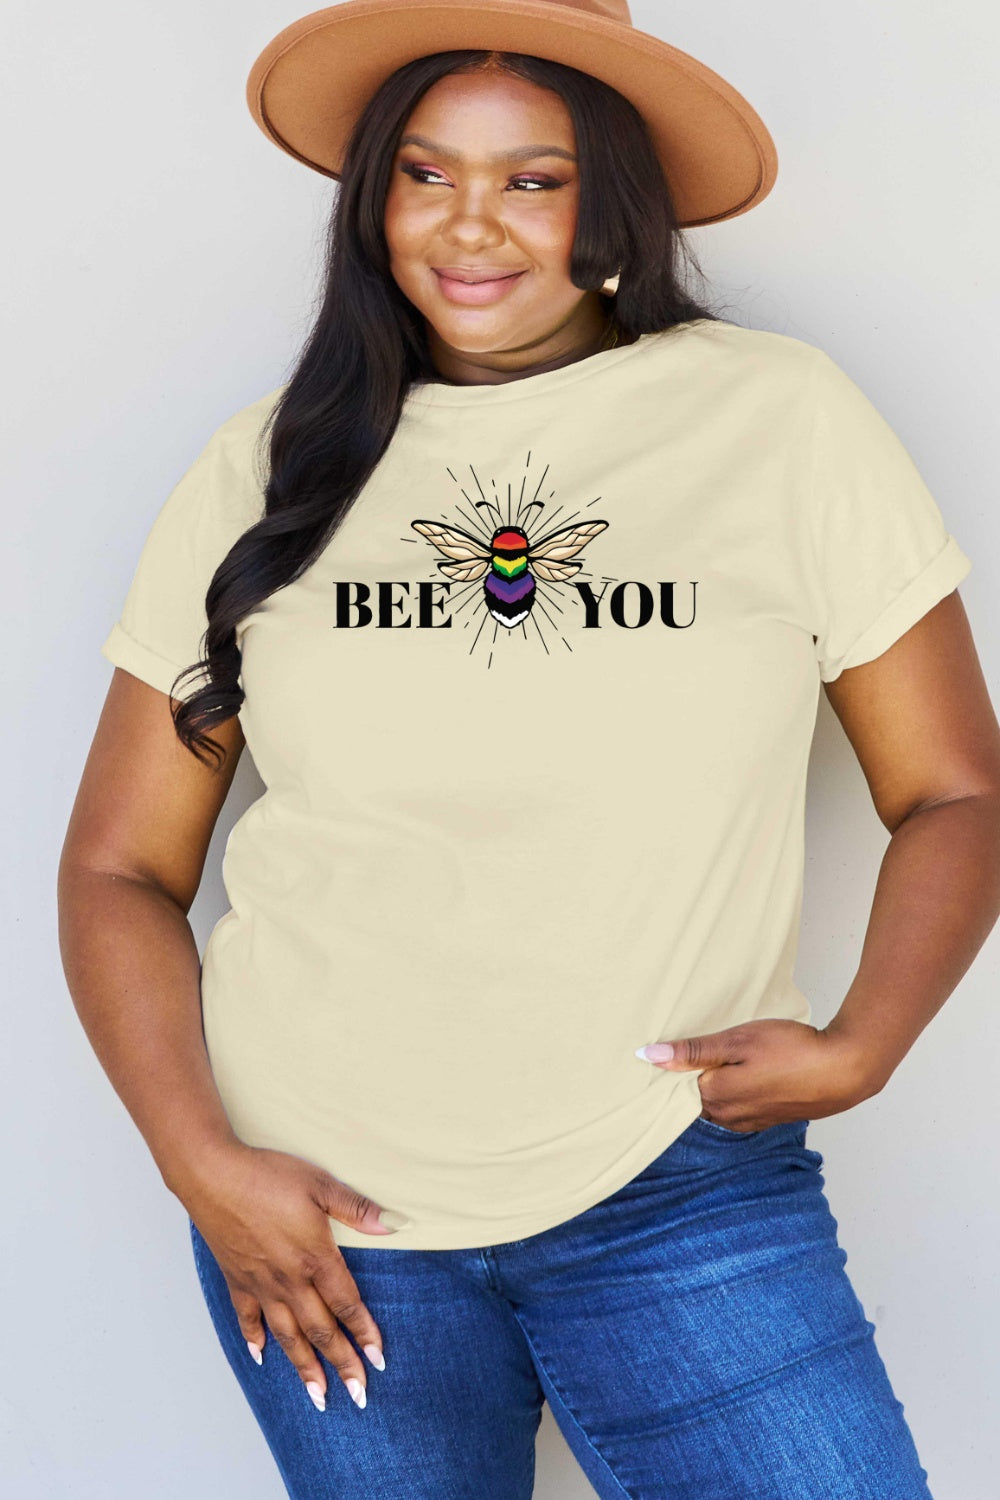 Simply Love Full Size BEE YOU Graphic T-Shirt